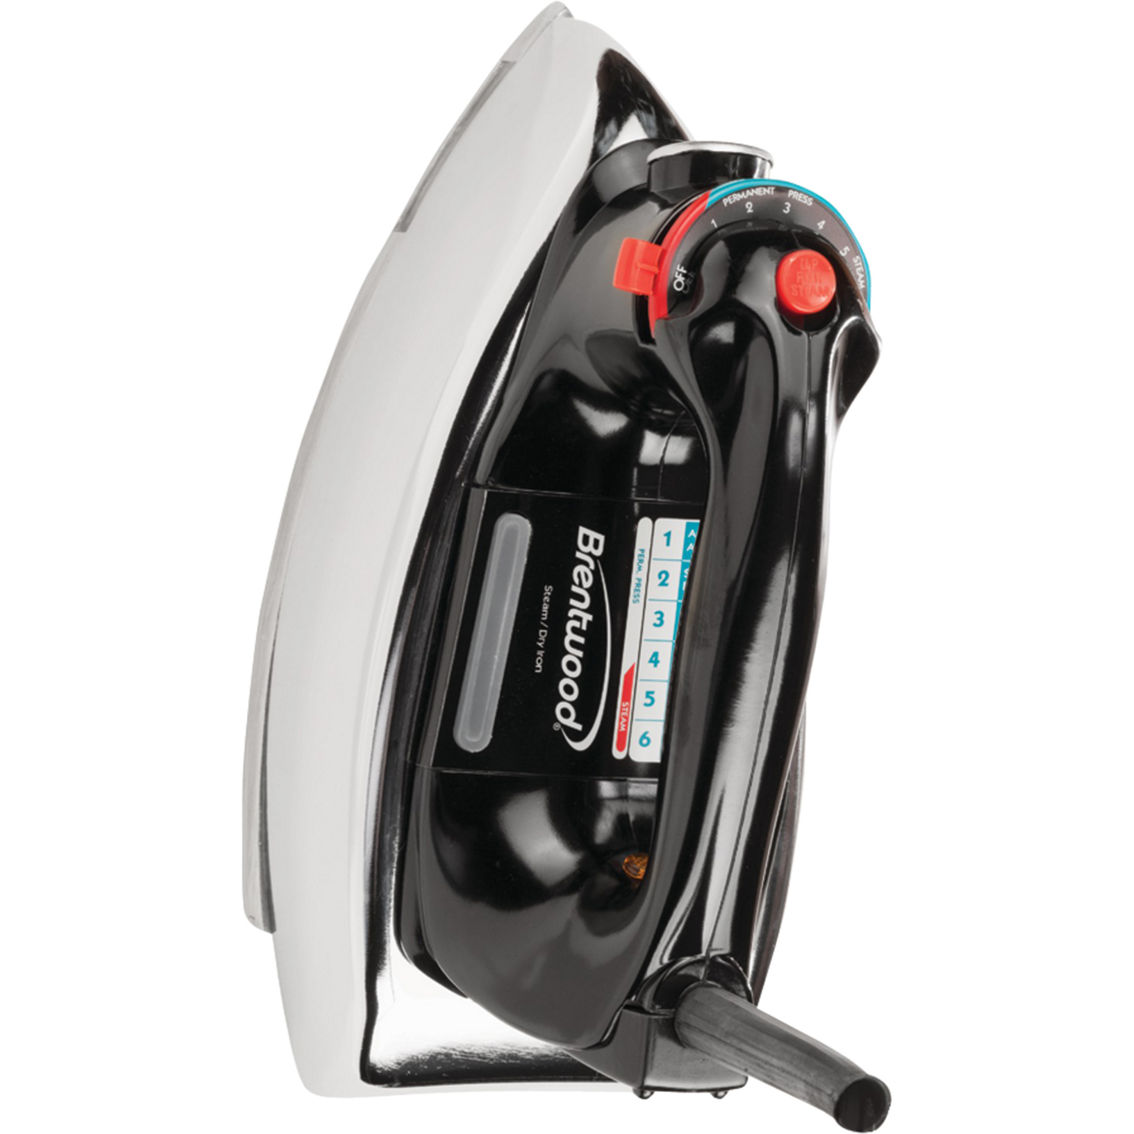 Brentwood Classic Chrome Plated Steam Iron - Image 2 of 5